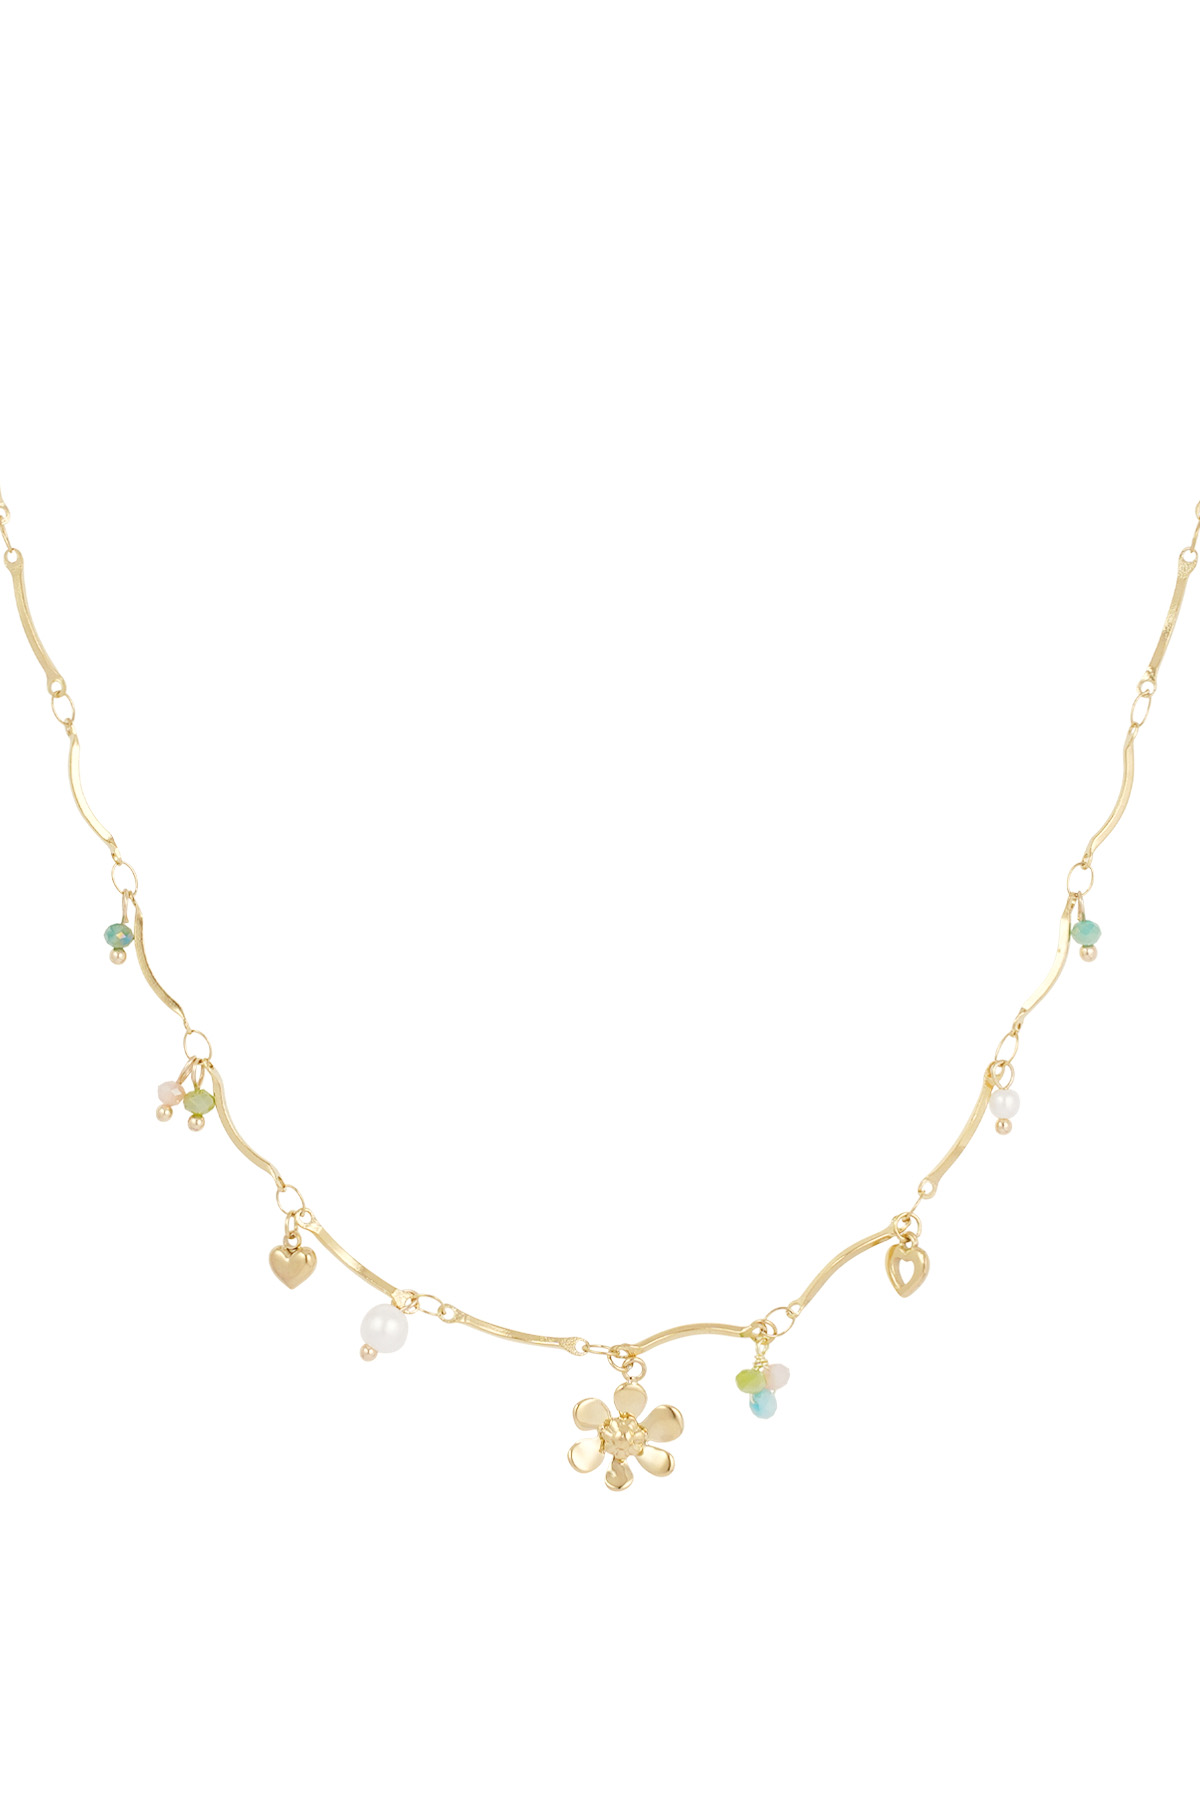 Summer flower charm necklace - gold